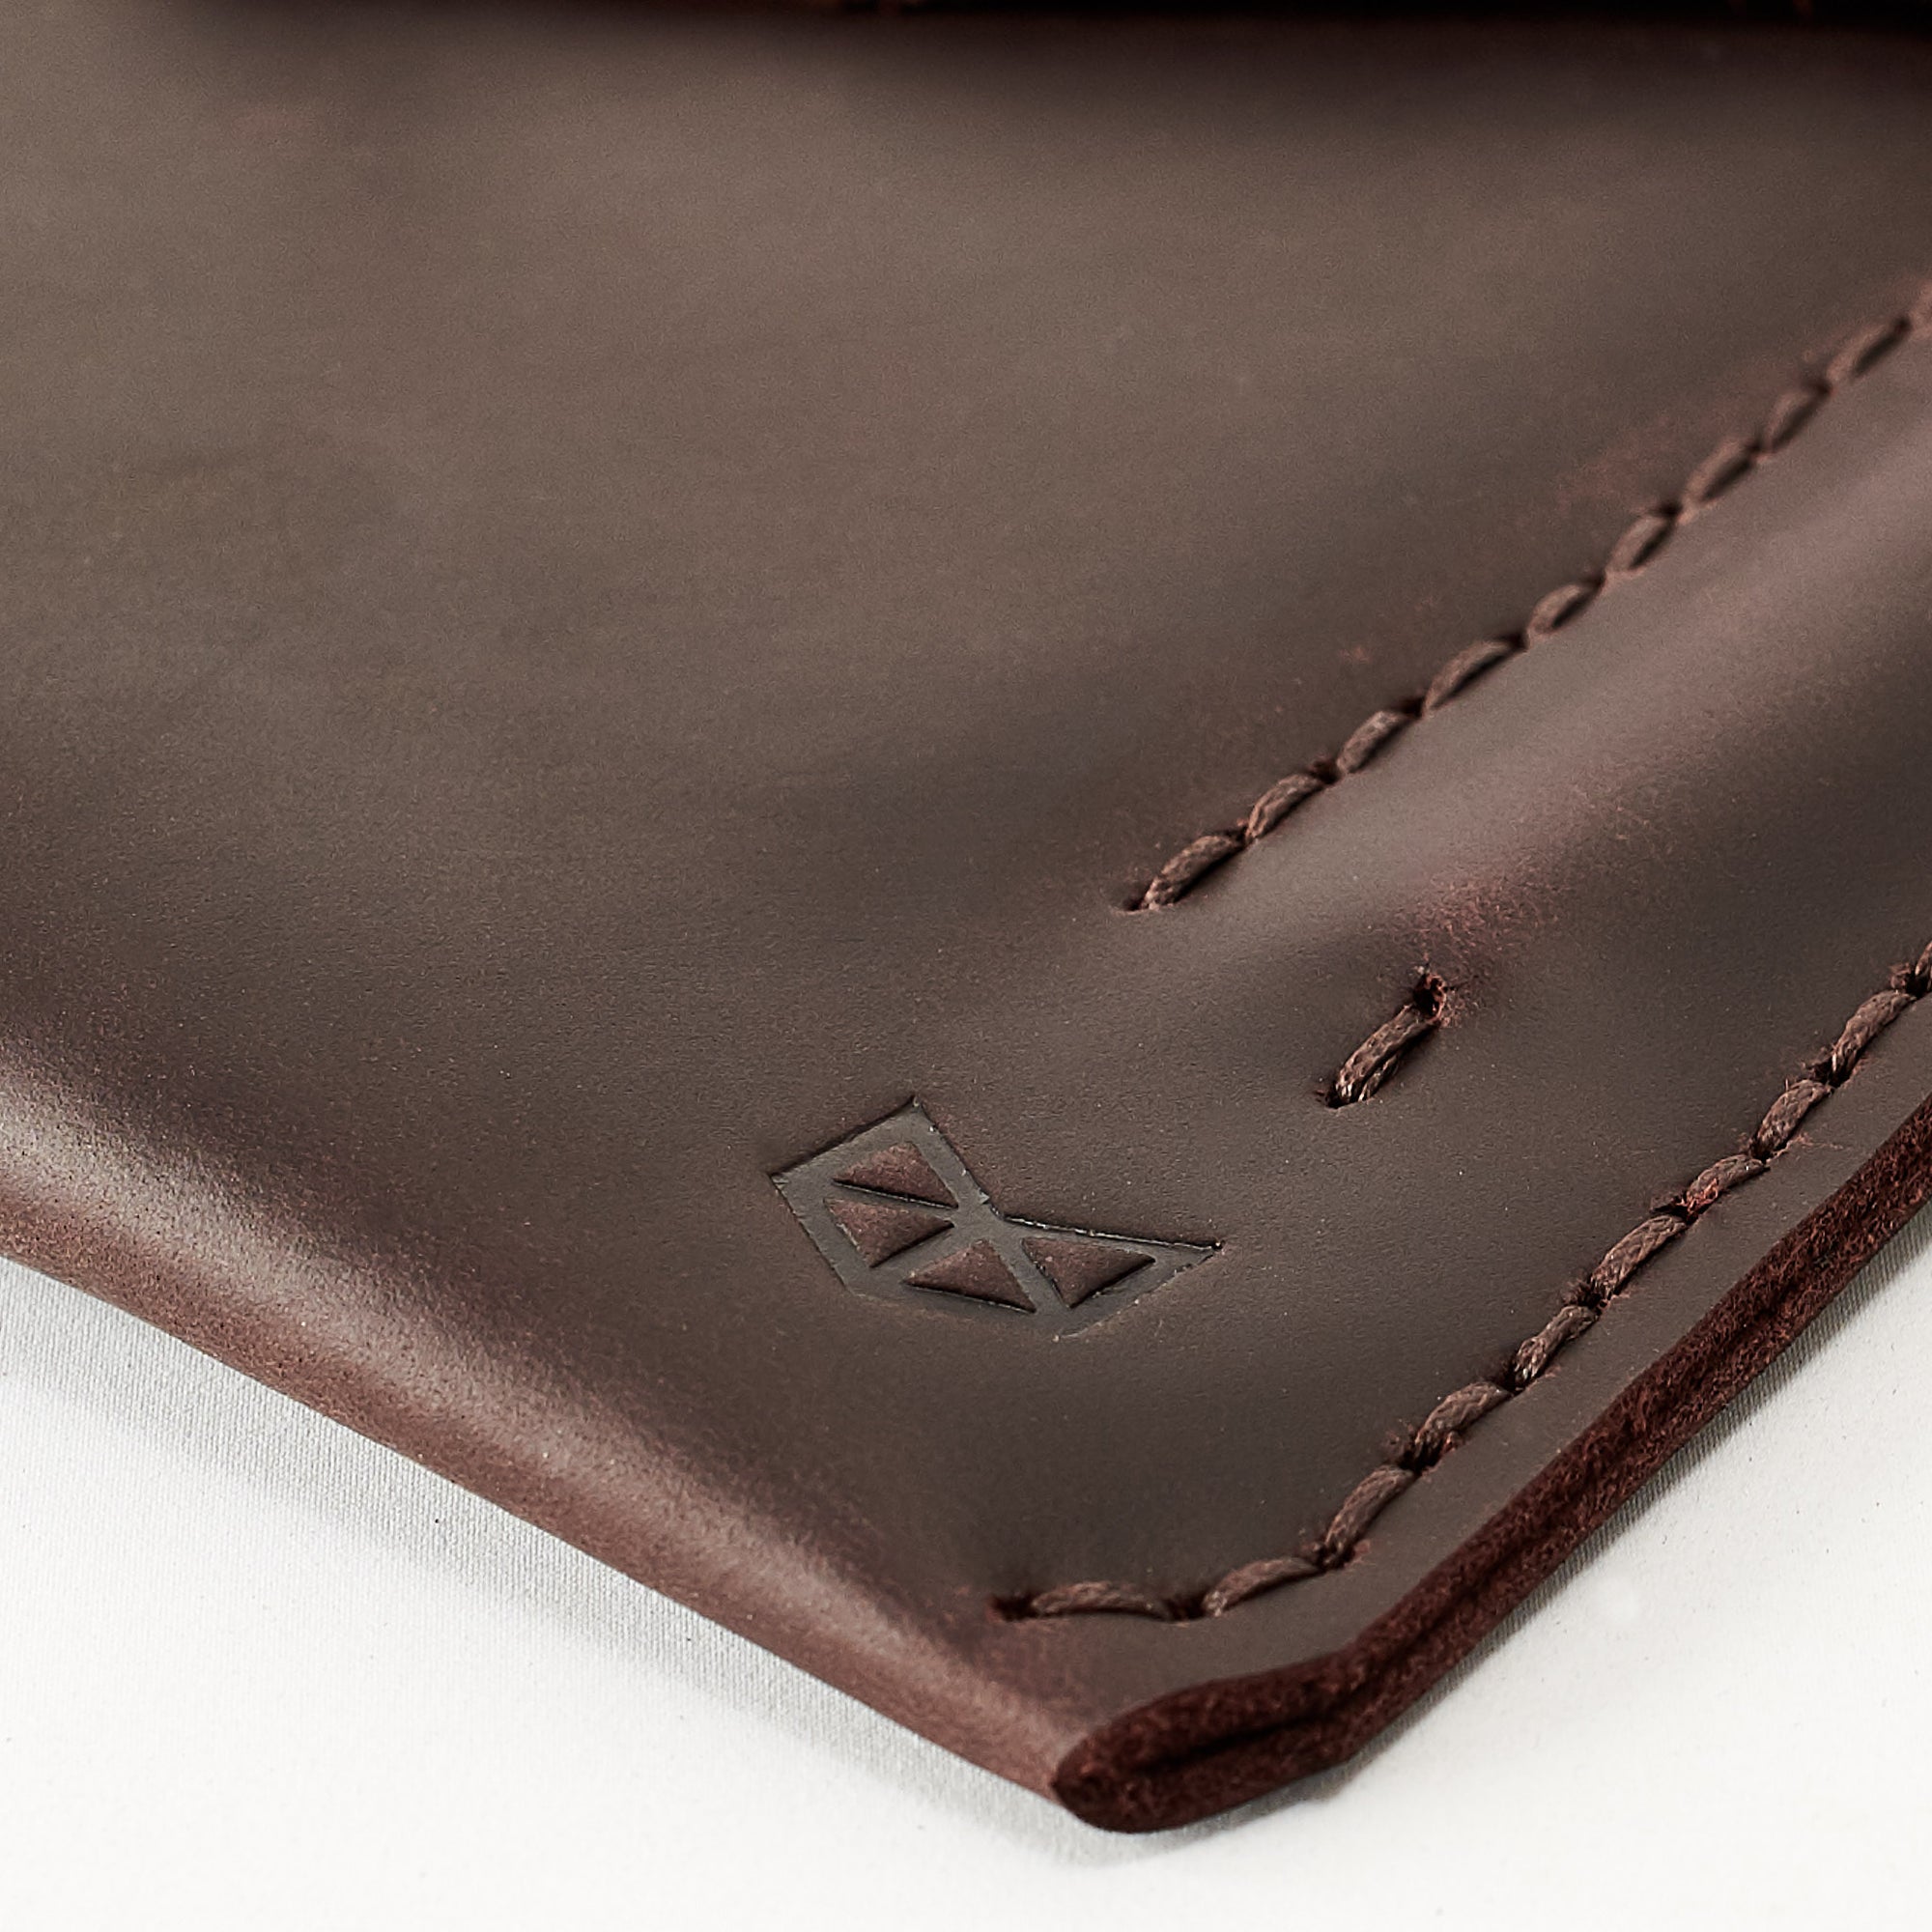 Hand stitched case. Dark brown leather sleeve for iPad pro 10.5 inch 12.9 inch. Mens gifts